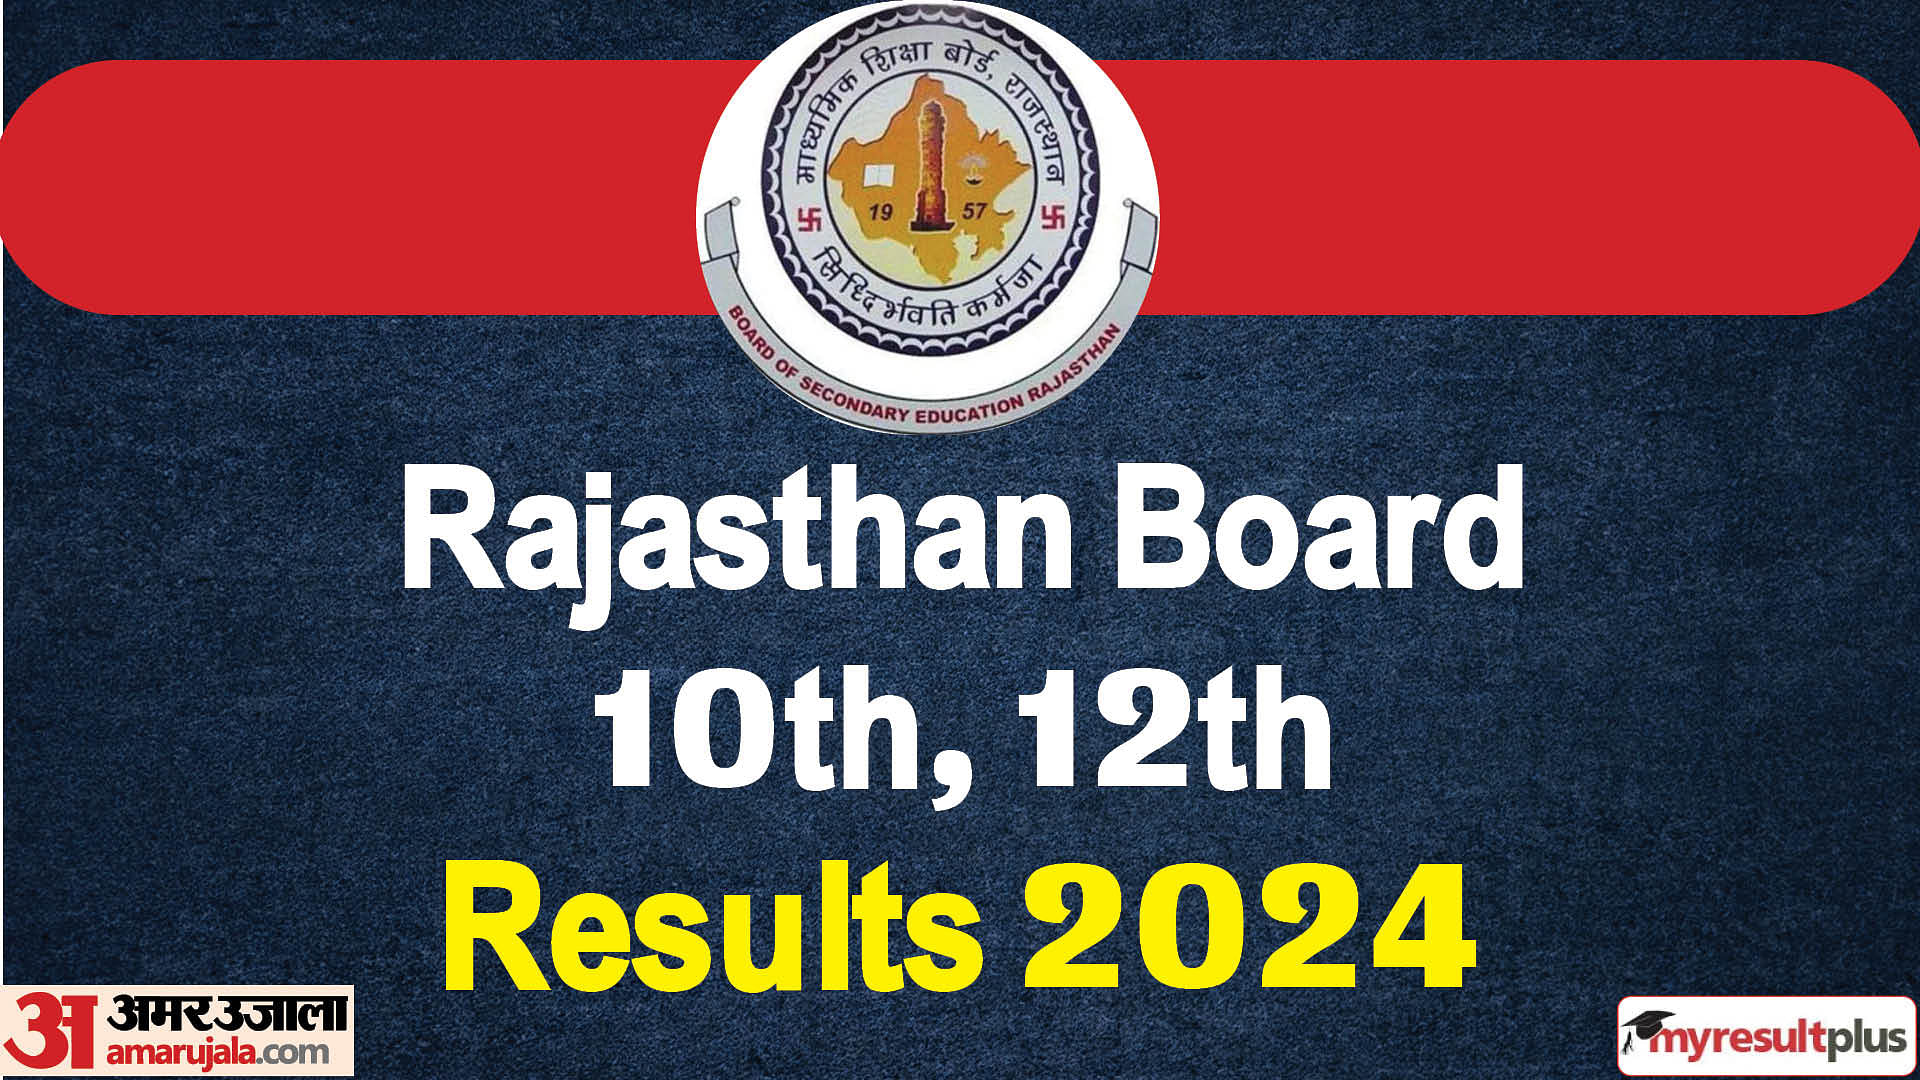 RBSE 10th, 12th Result expected soon, Know about the previous year's analytics here